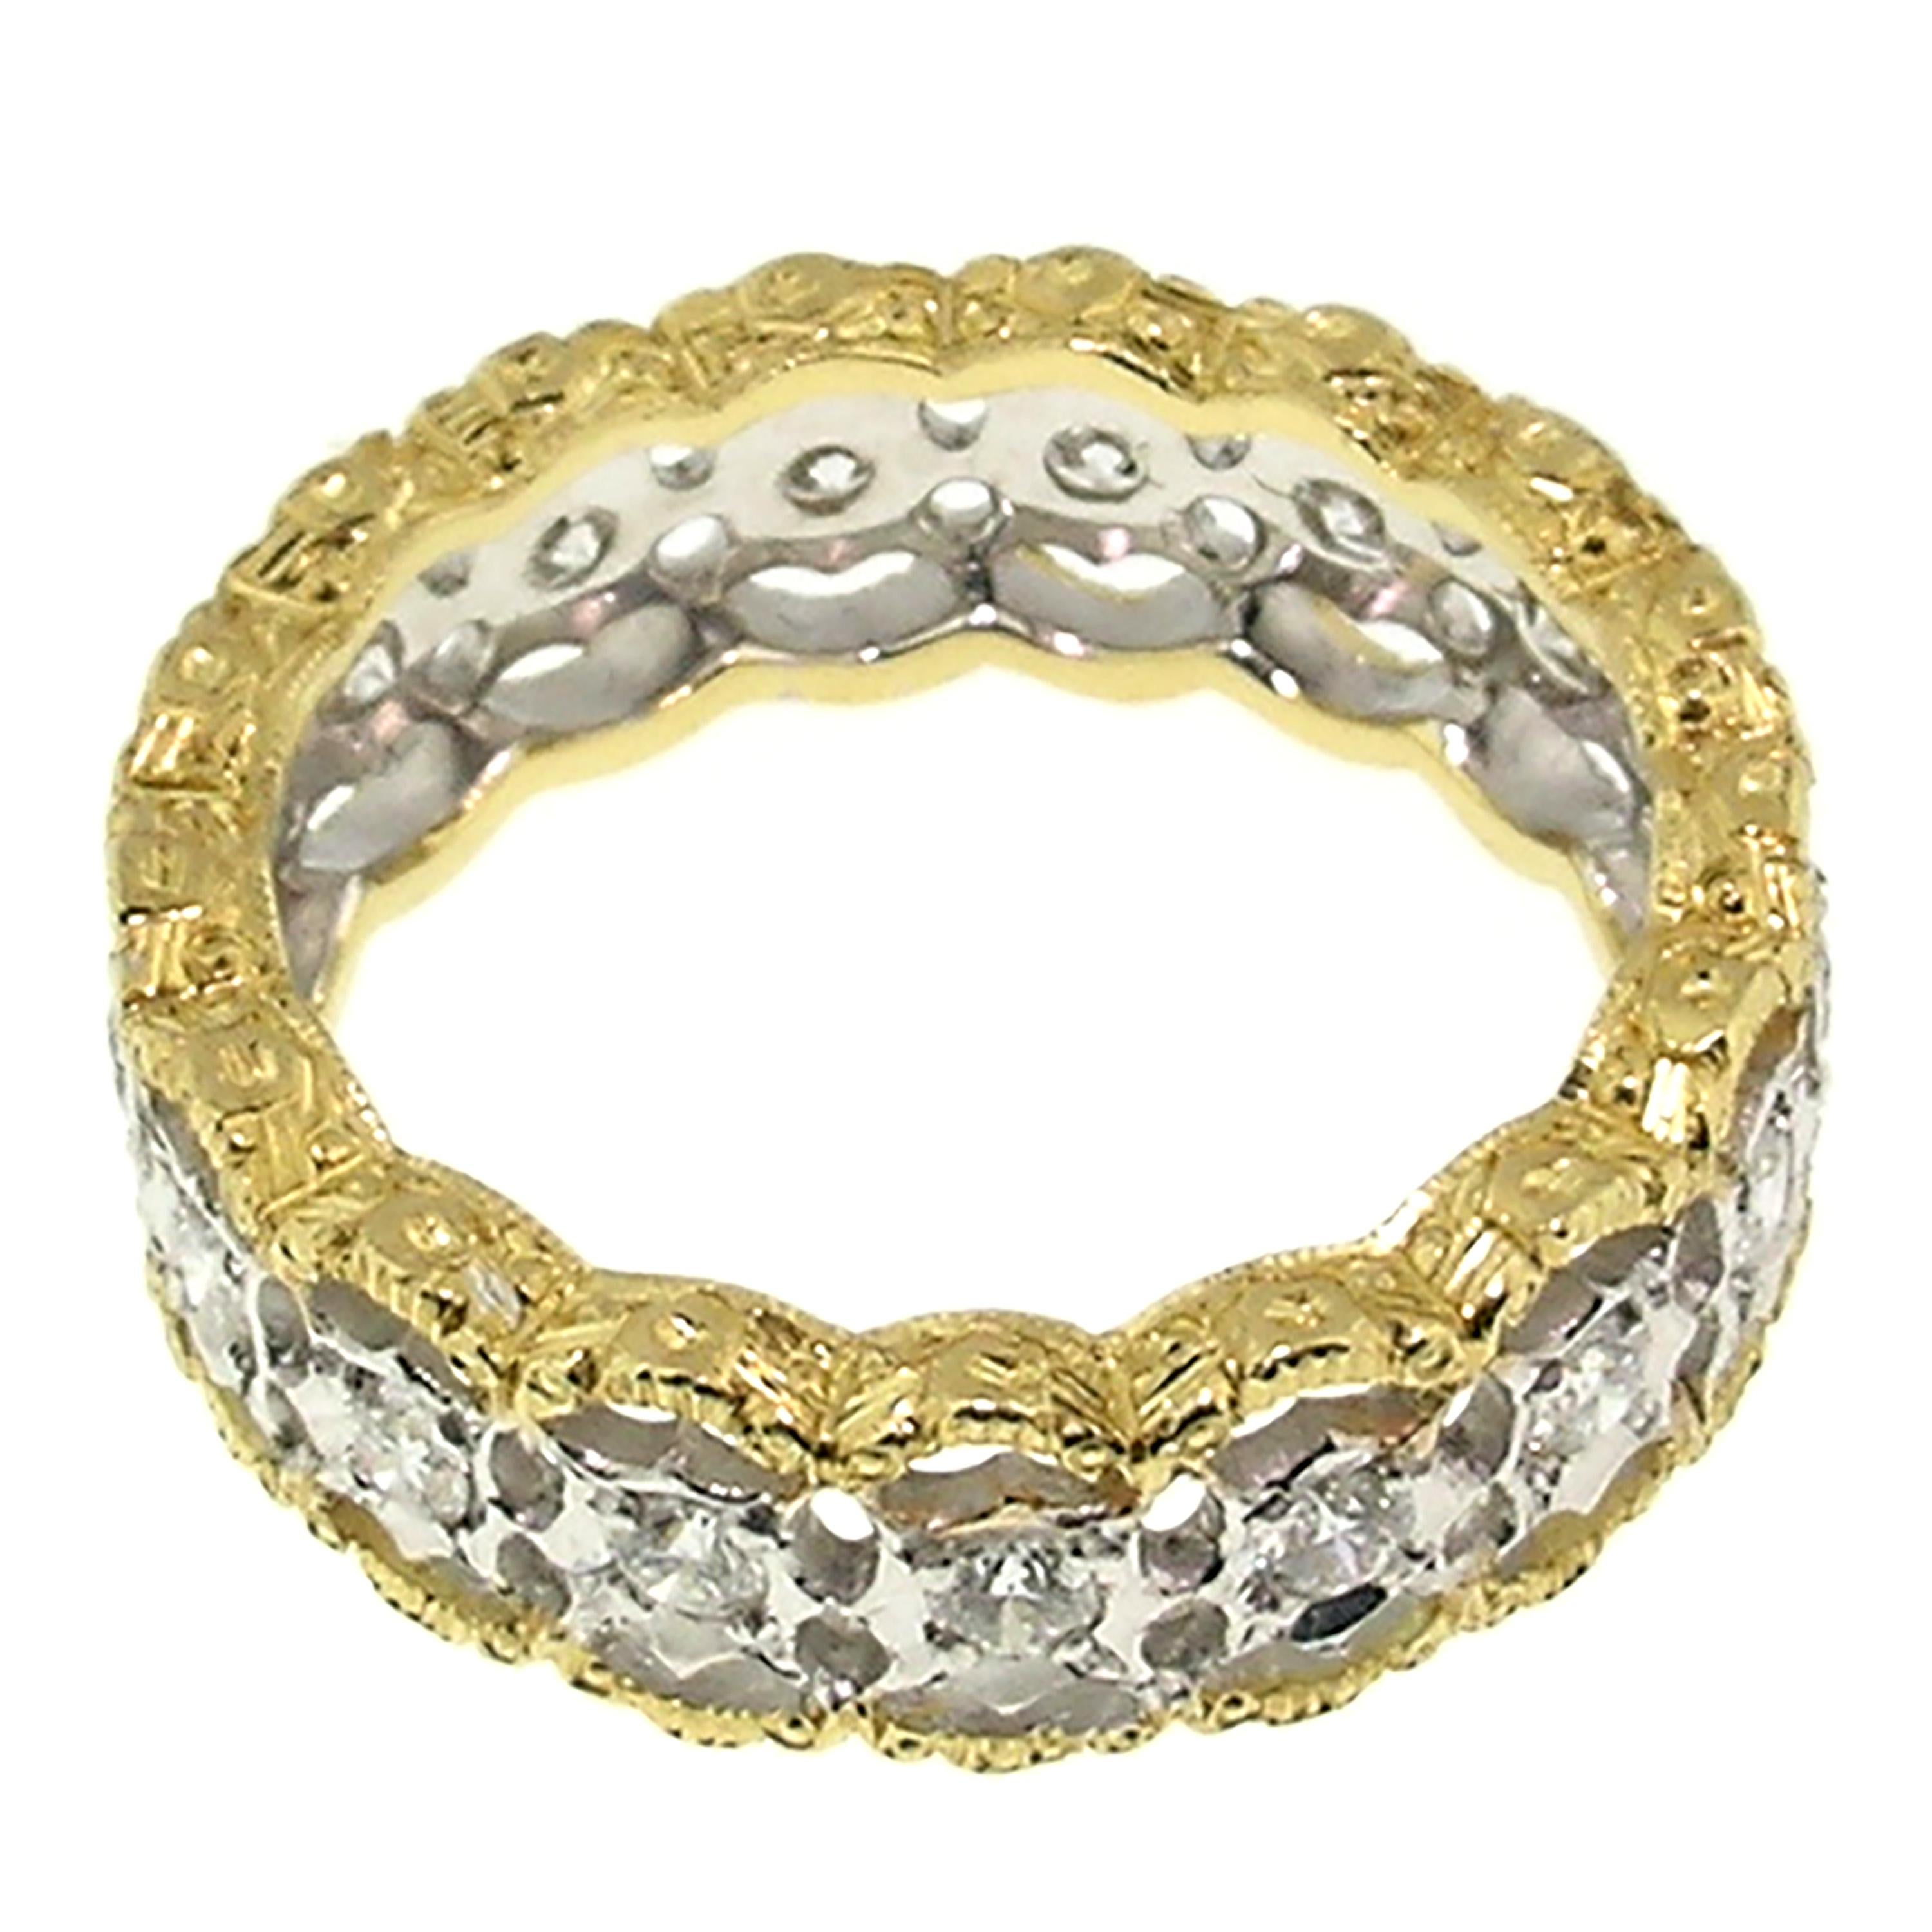 Women's 18kt and 0.90ct Diamond Eternity Band, Handmade in Florence, Italy For Sale